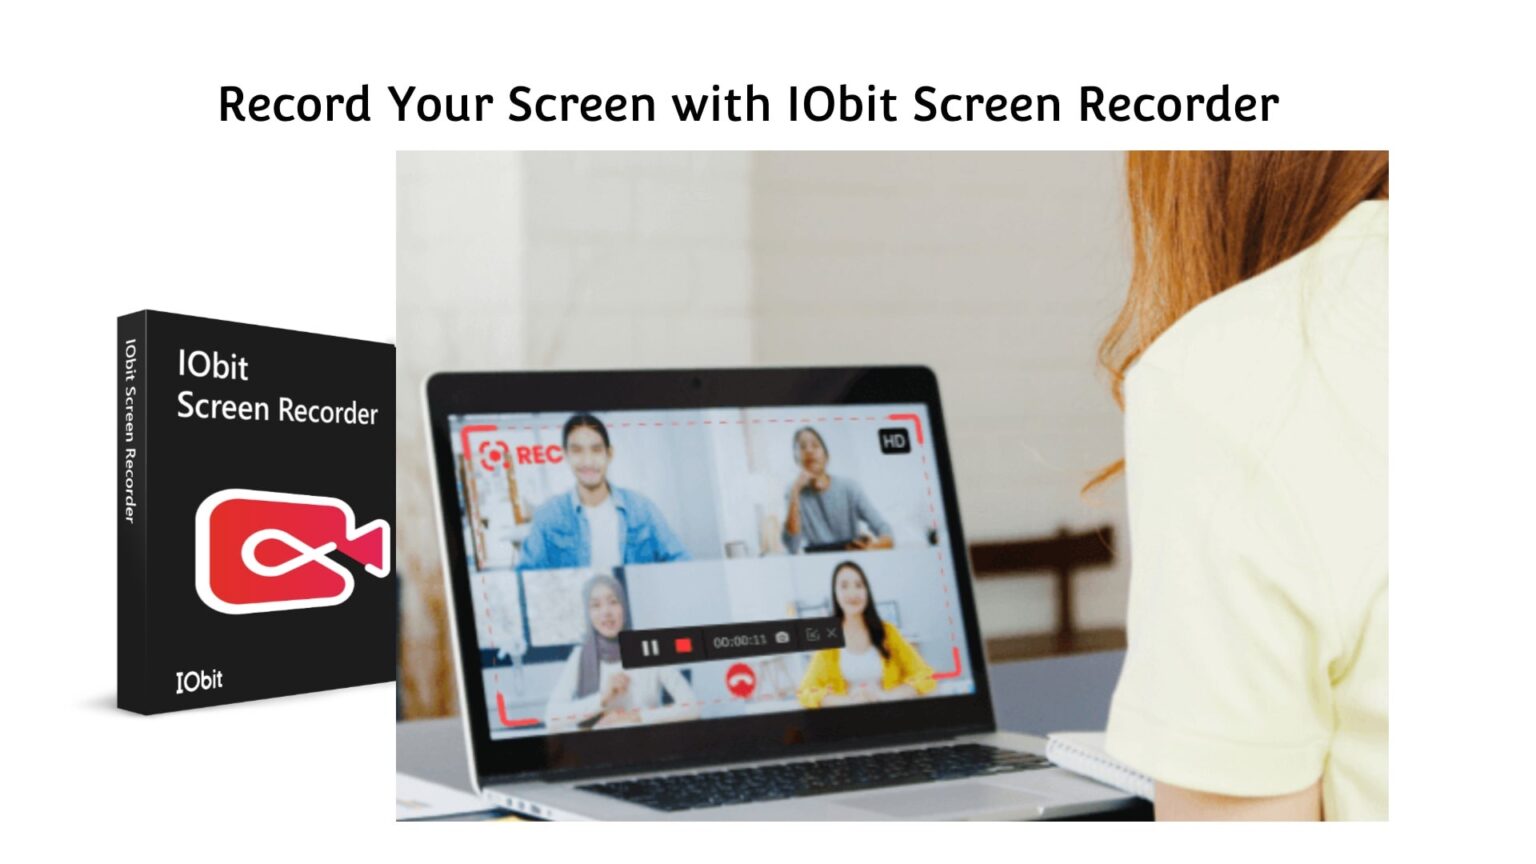 The IObit Screen Recorder is a great tool to use to record your PC screen. Take a look at more information on this device and its many benefits.